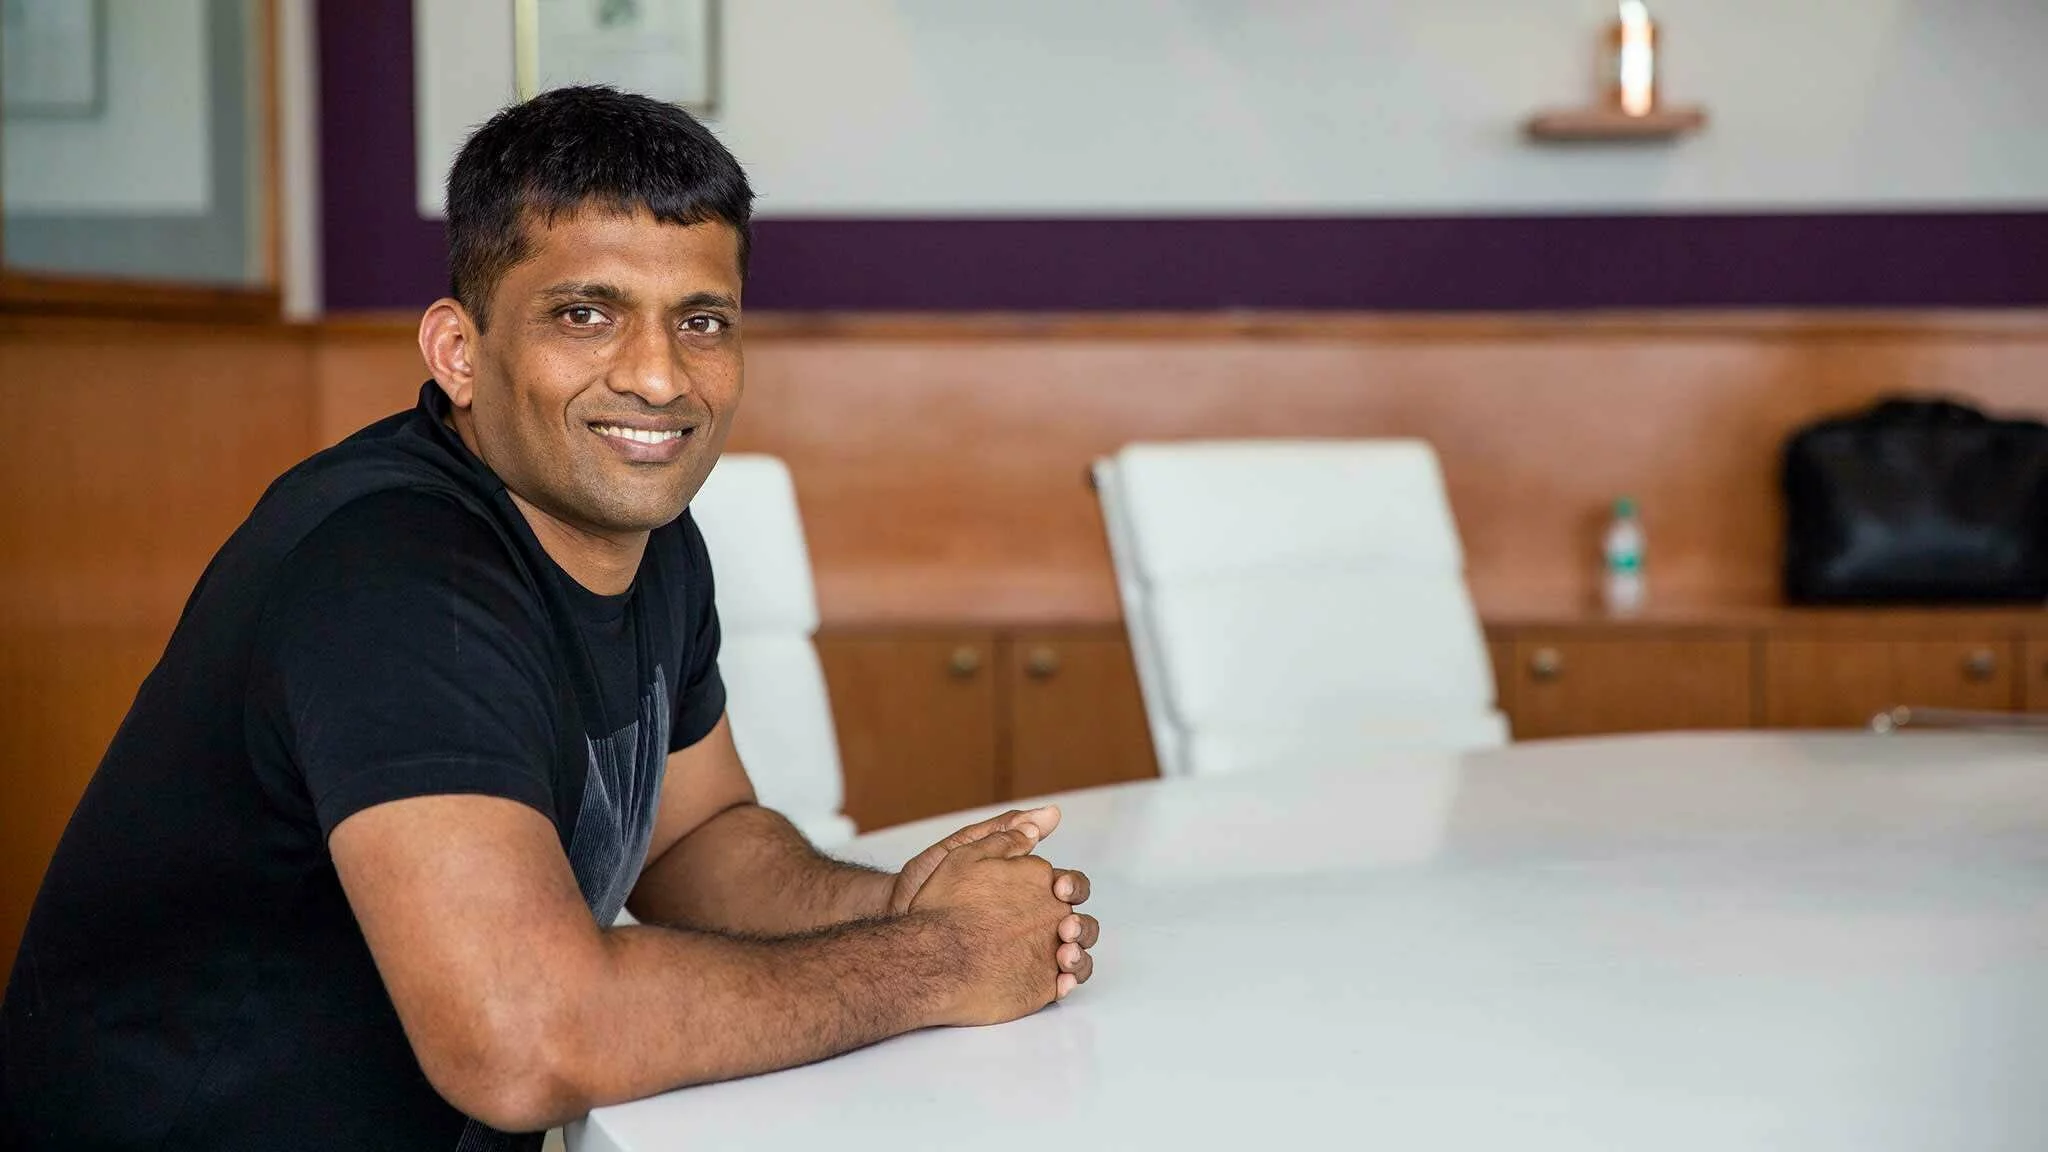 Byju’s finds profitability in Indian consumers’ hunger for education